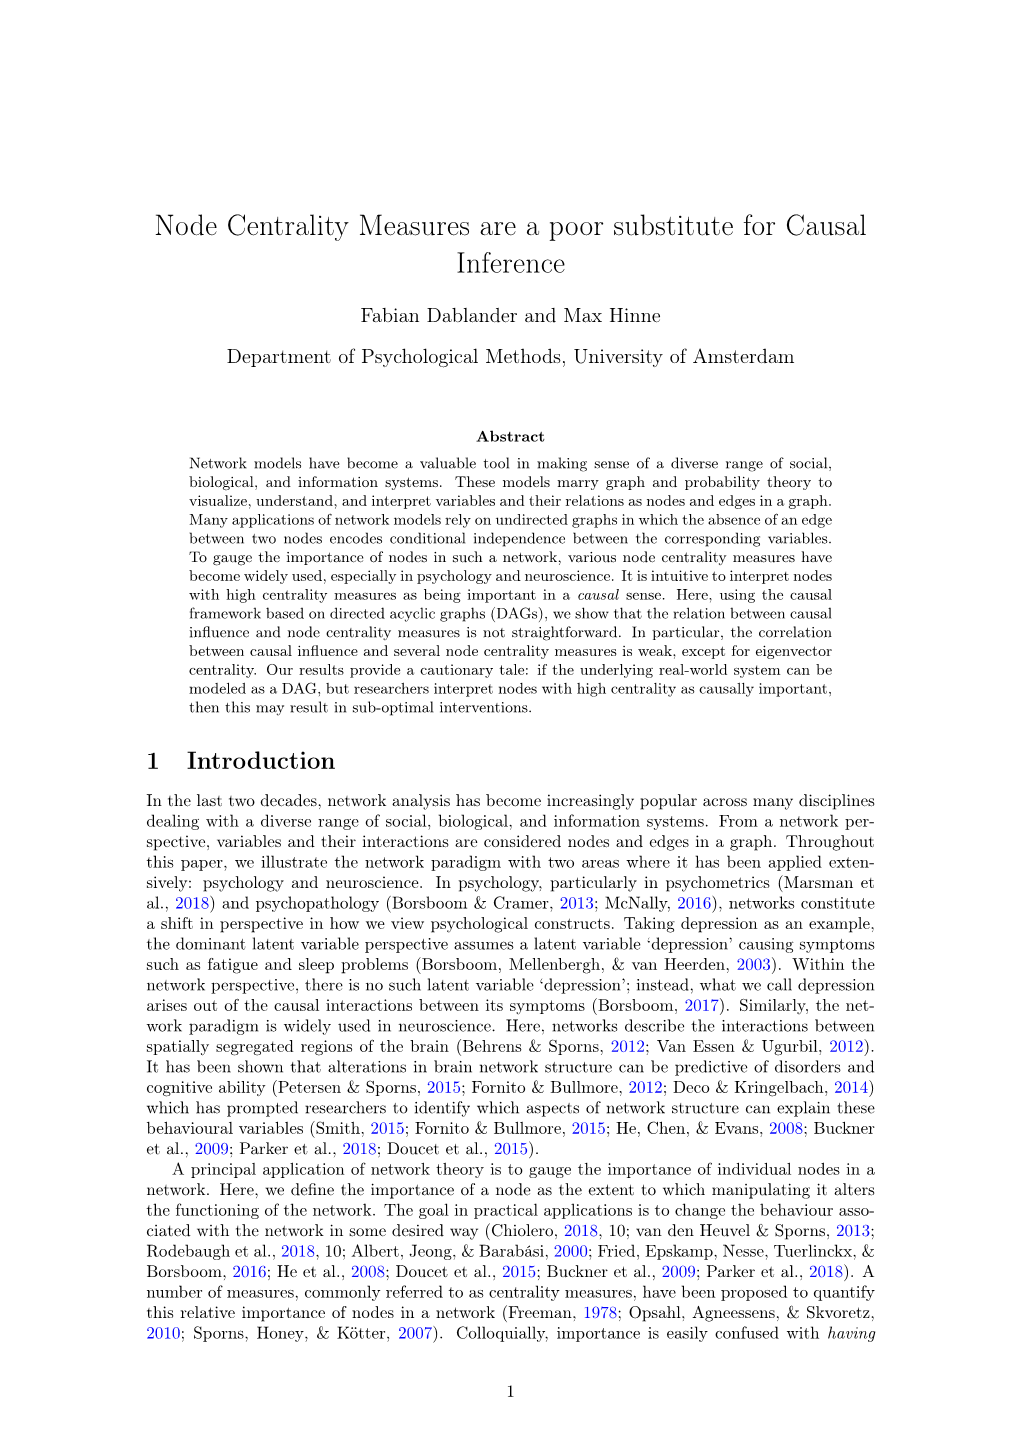 Node Centrality Measures Are a Poor Substitute for Causal Inference